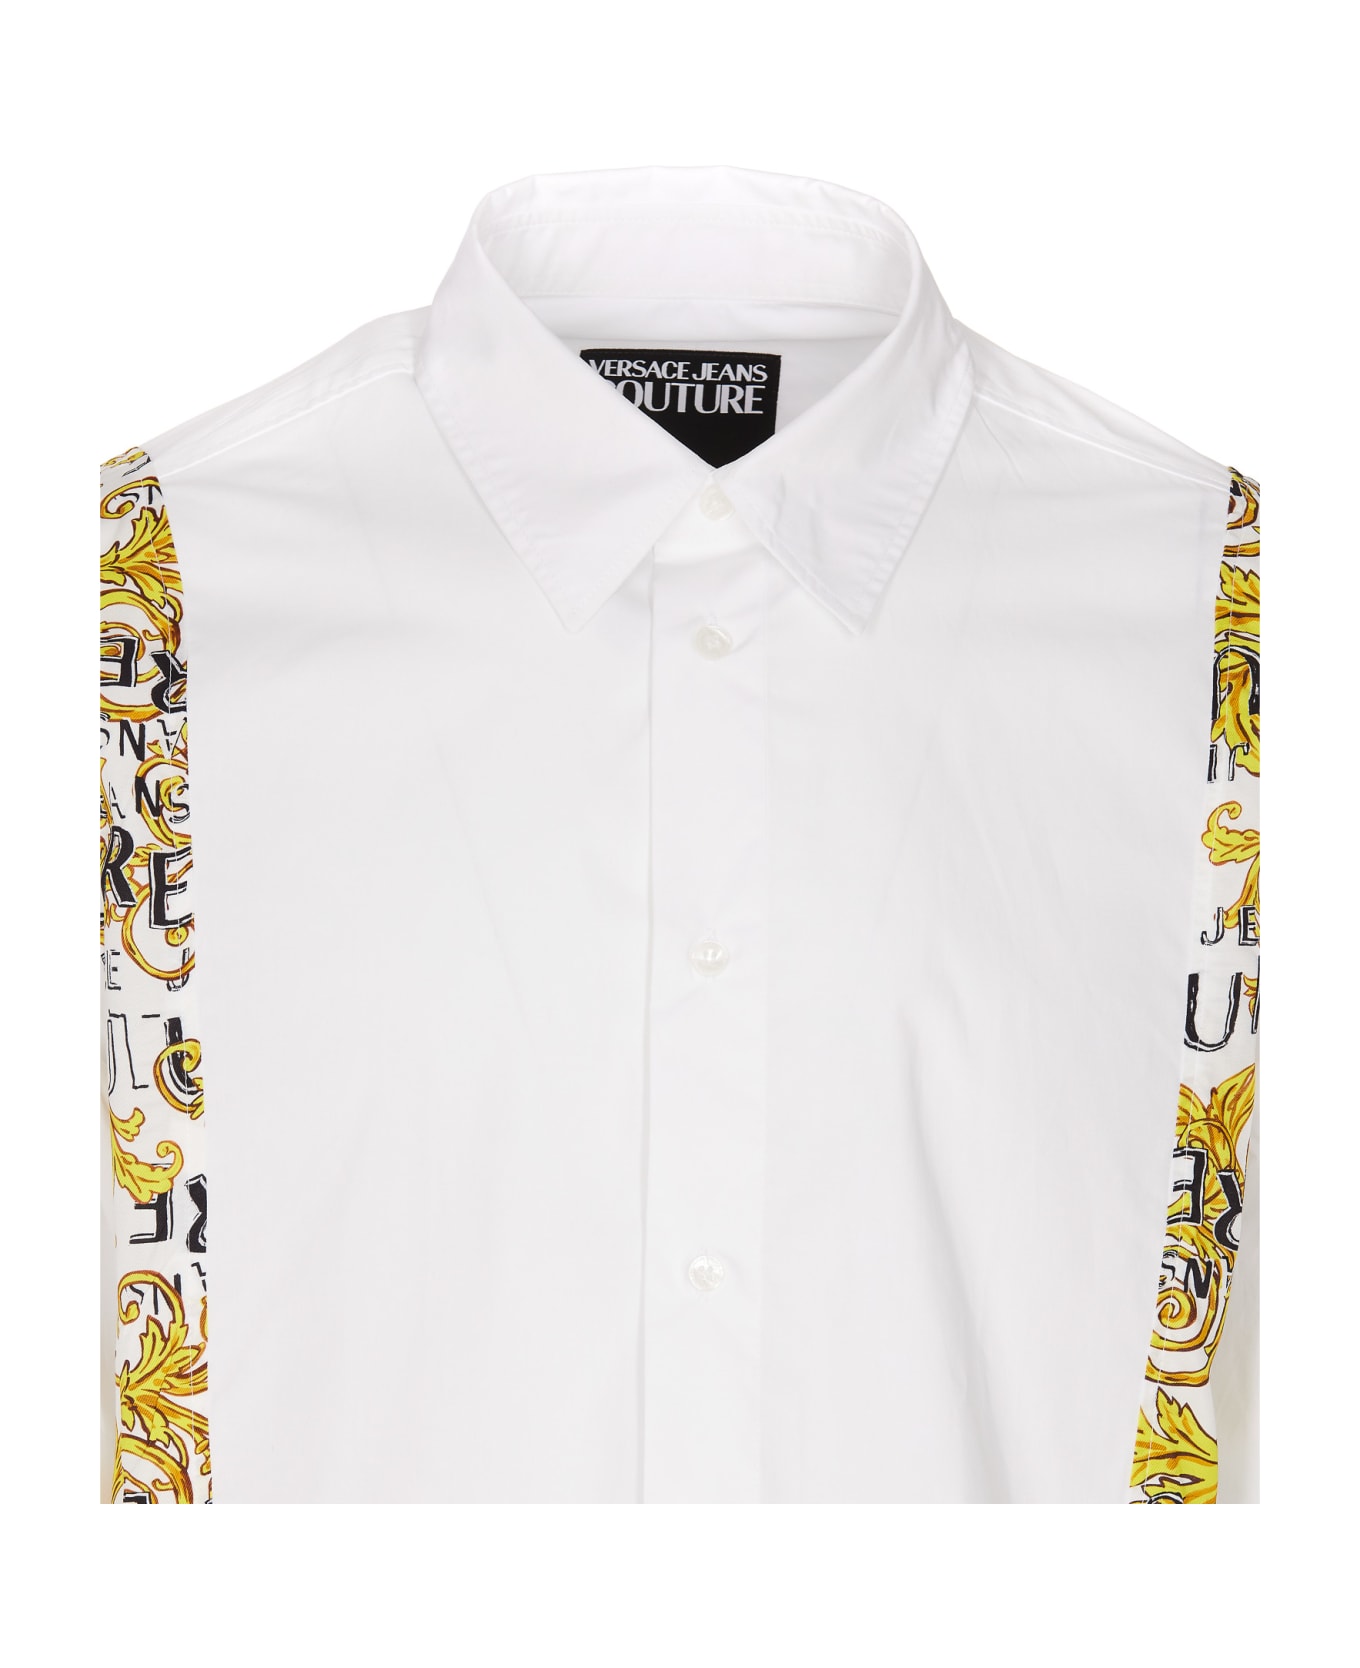 Versace Jeans Couture Shirt - White